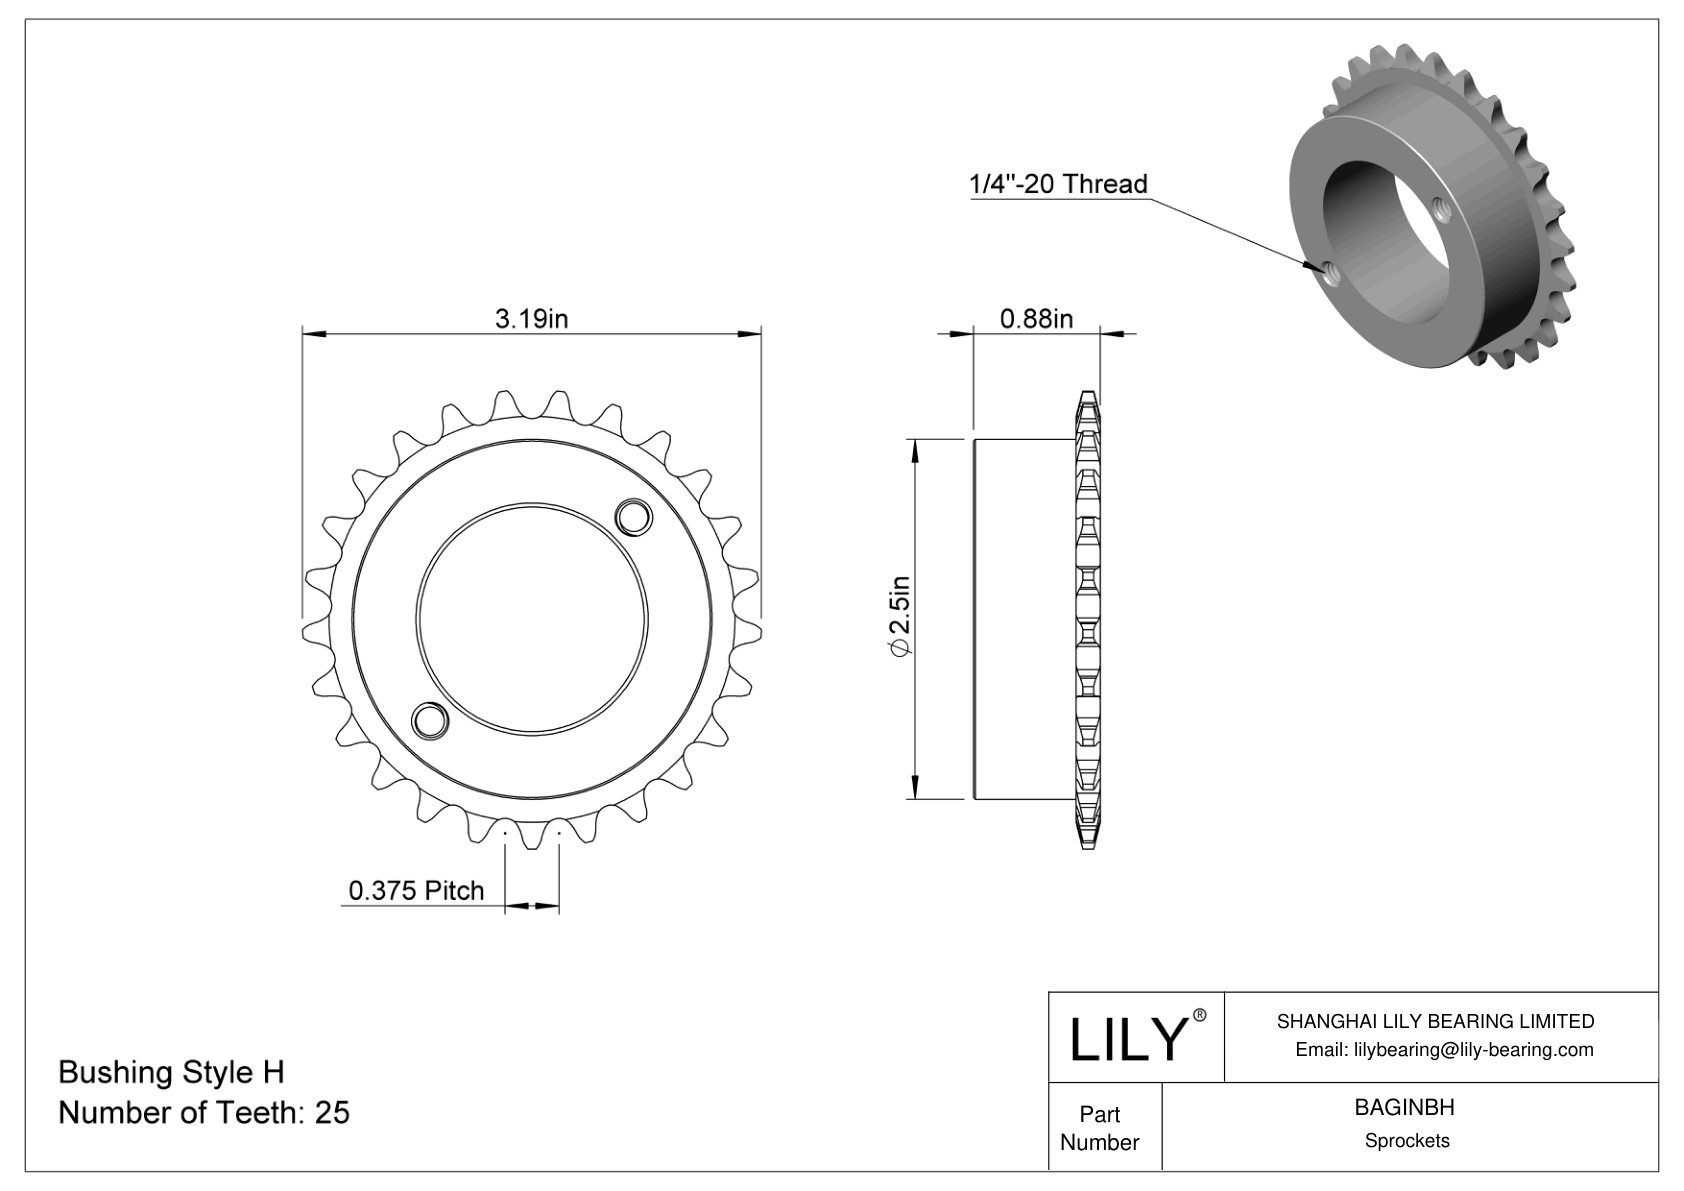 BAGINBH Split-Tapered Bushing-Bore Sprockets for ANSI Roller Chain cad drawing